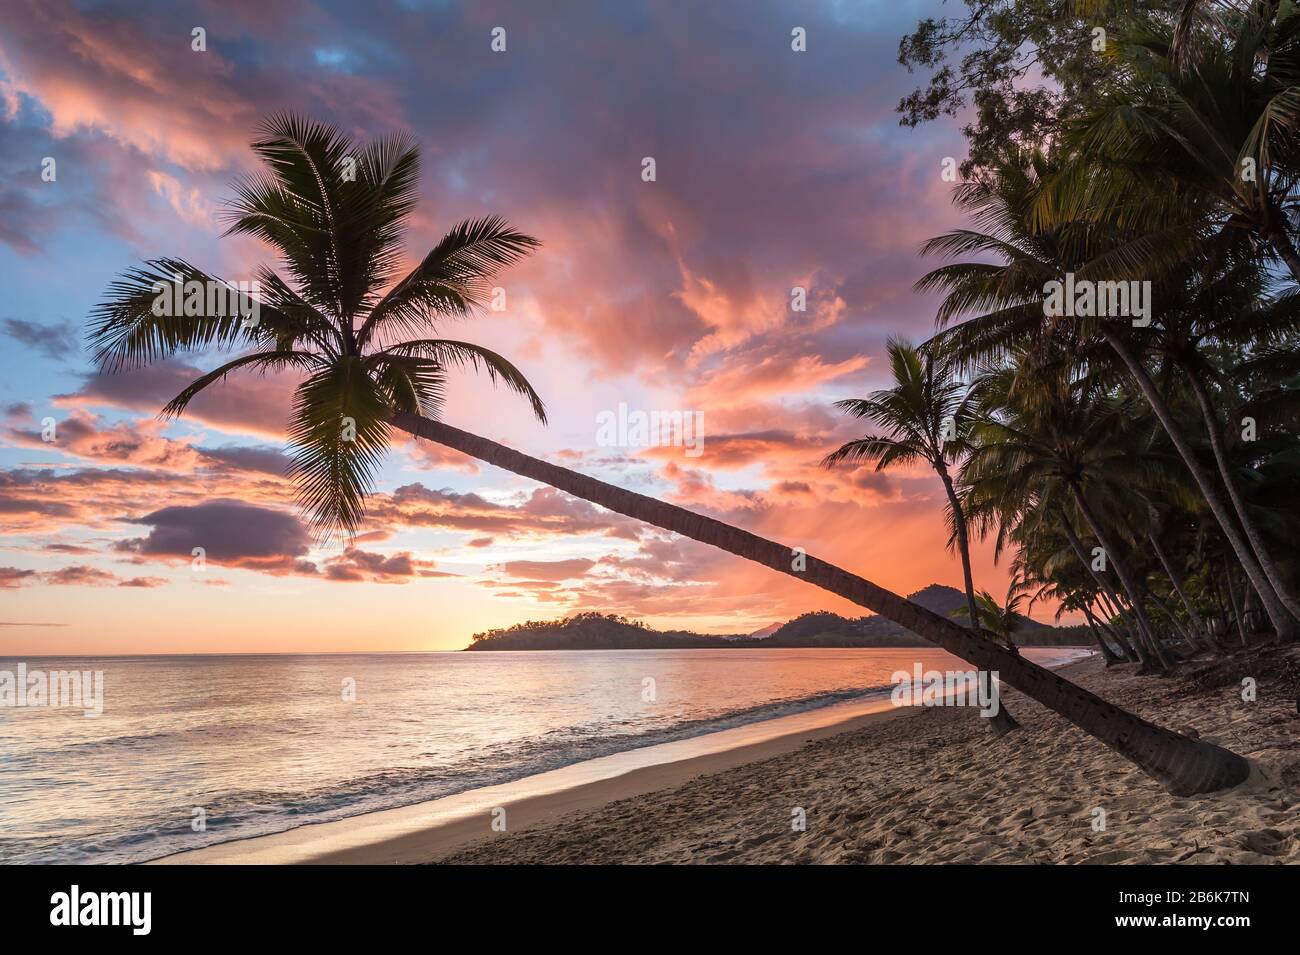 A a gorgeous, iconic coconut palm hangs obliquely over a typical tropical beach scene with island in the background and coconut grove beach line. Stock Photo